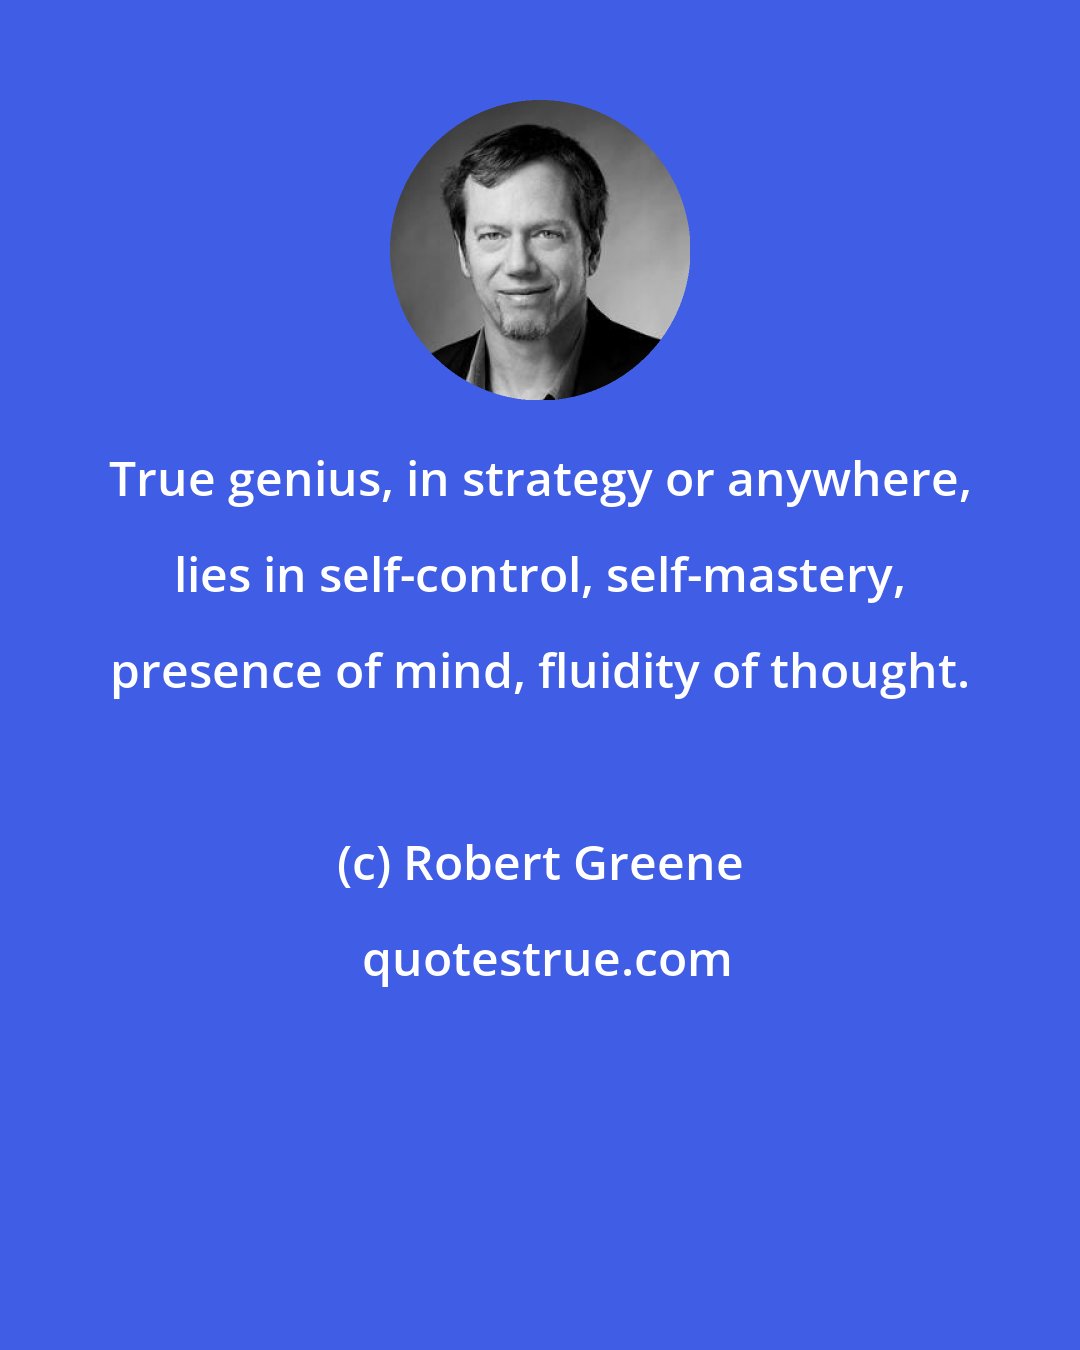 Robert Greene: True genius, in strategy or anywhere, lies in self-control, self-mastery, presence of mind, fluidity of thought.